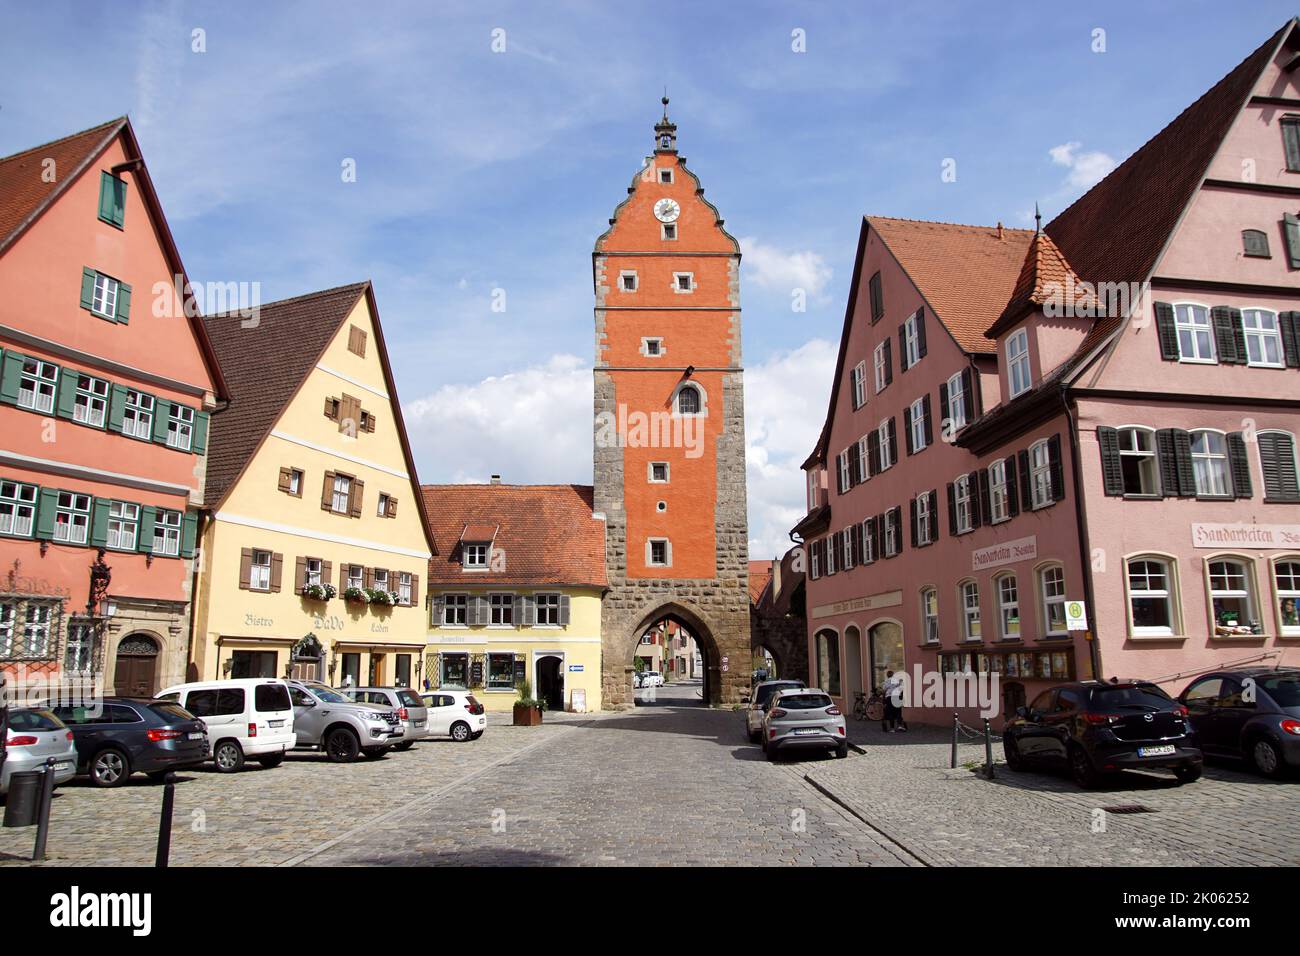 Wörnitztor, the medieval city gate from the old center of the German city of Dinkelsbühl. Summer. August. Stock Photo